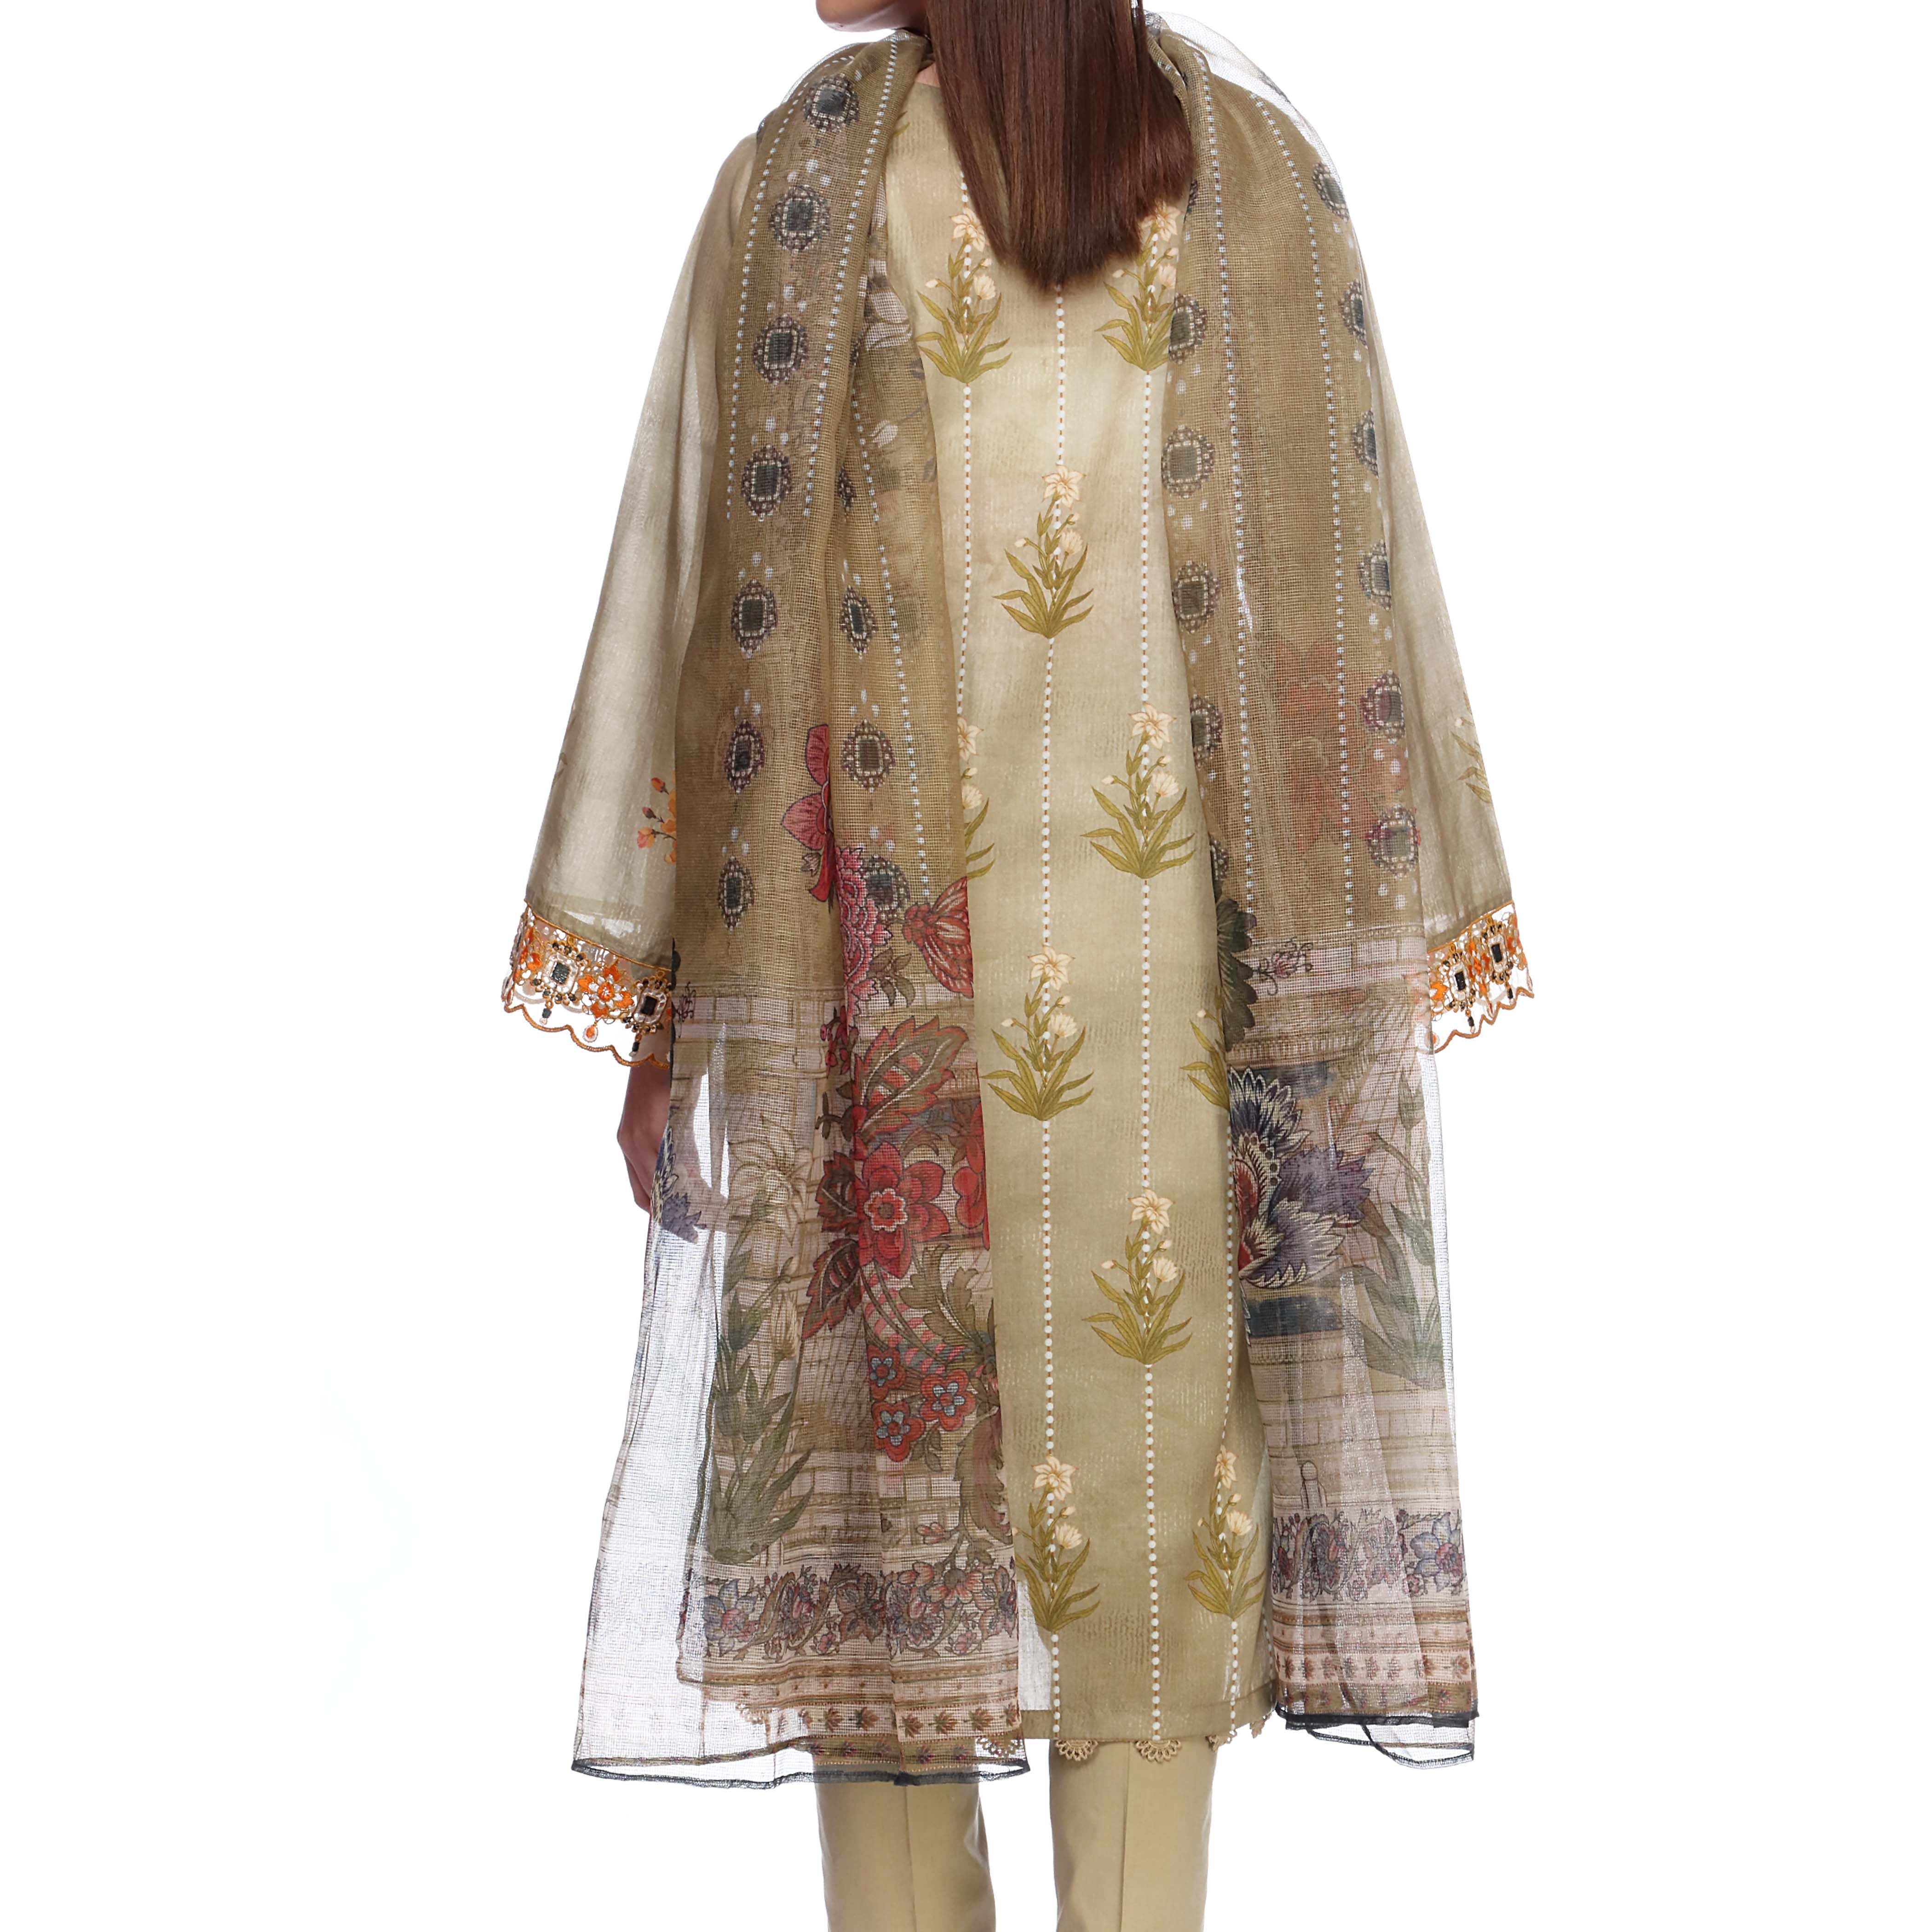 Digital Printed Lawn Shirt With Embroidered Sleeves
Digital Printed Net Dupatta
Plain Dyed Cambric Trousers